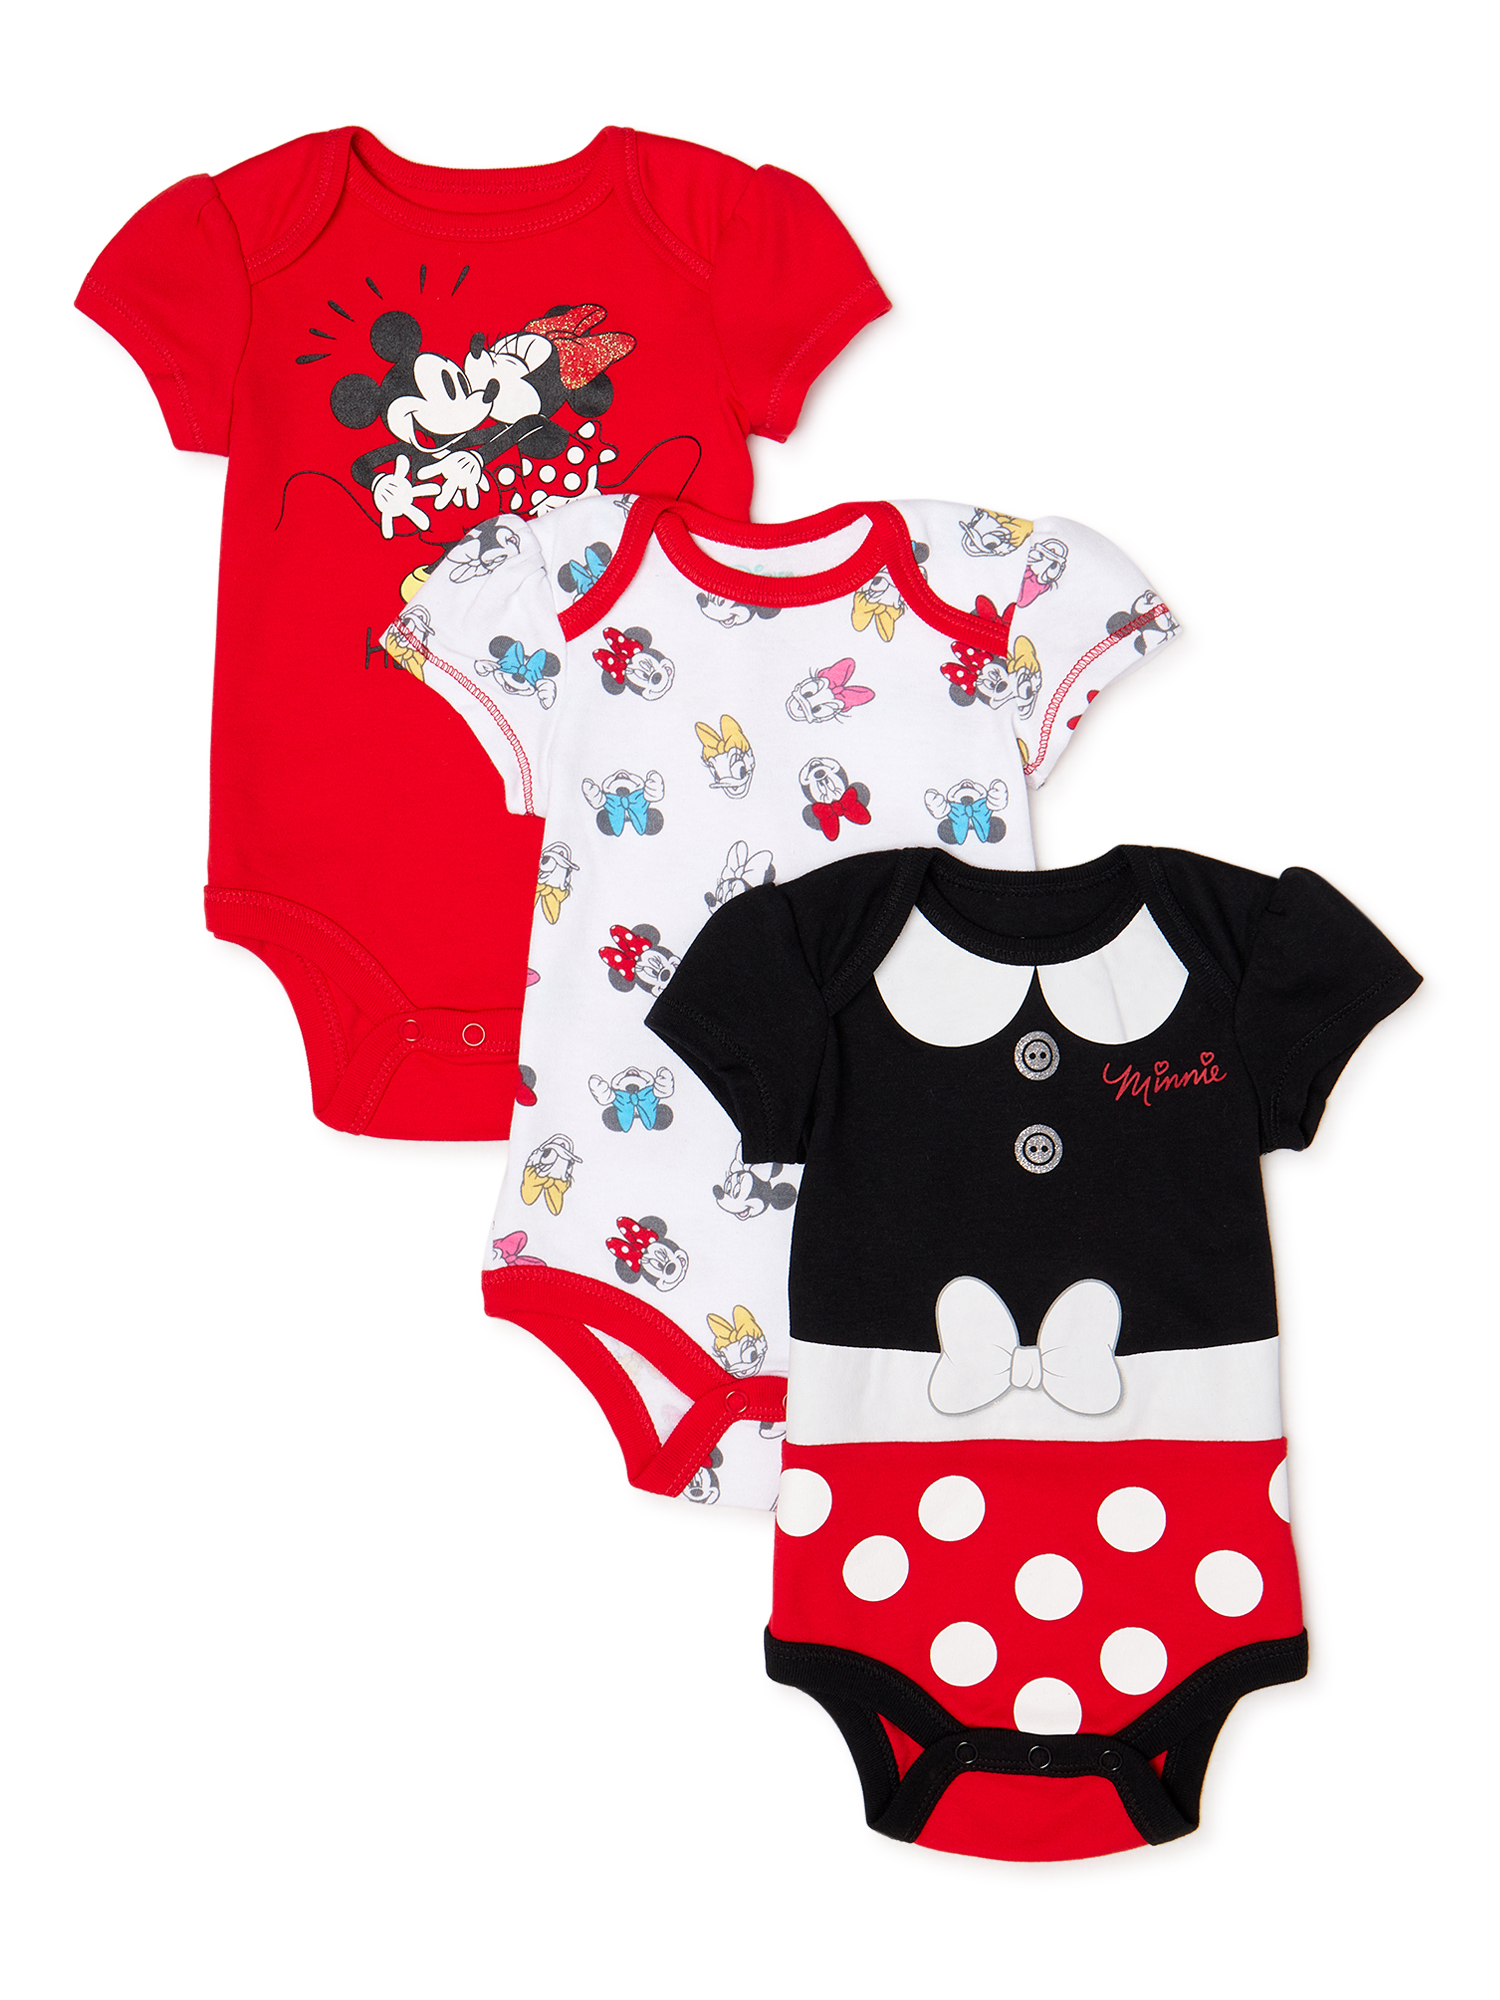 Disney Baby Girl Minnie Mouse Baby Girl Bodysuits, 3-Pack - image 1 of 3